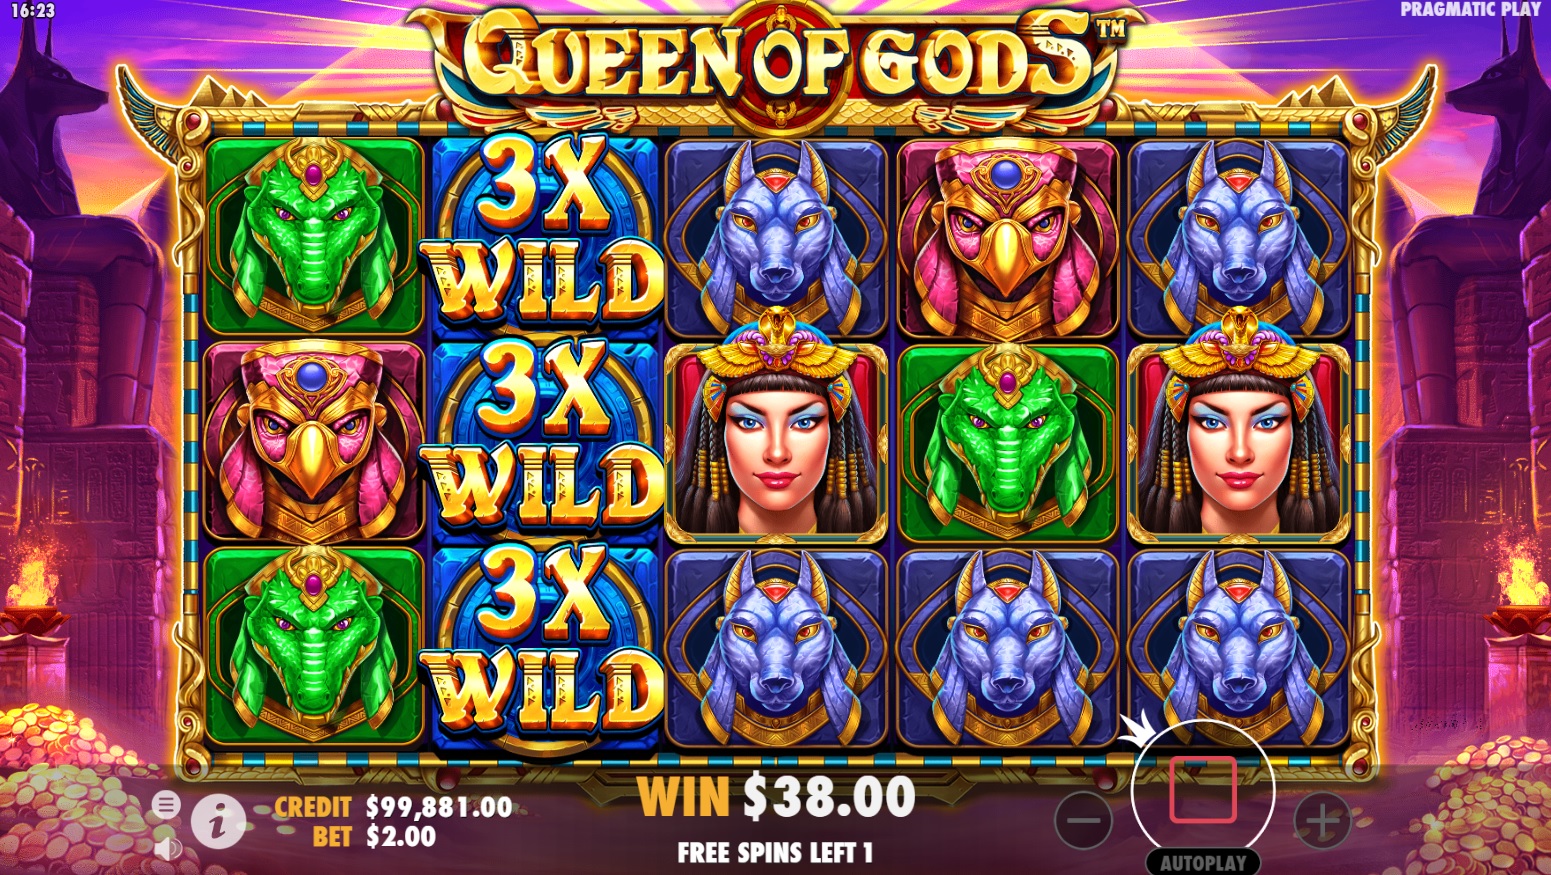 Queen of Gods, Free spins feature